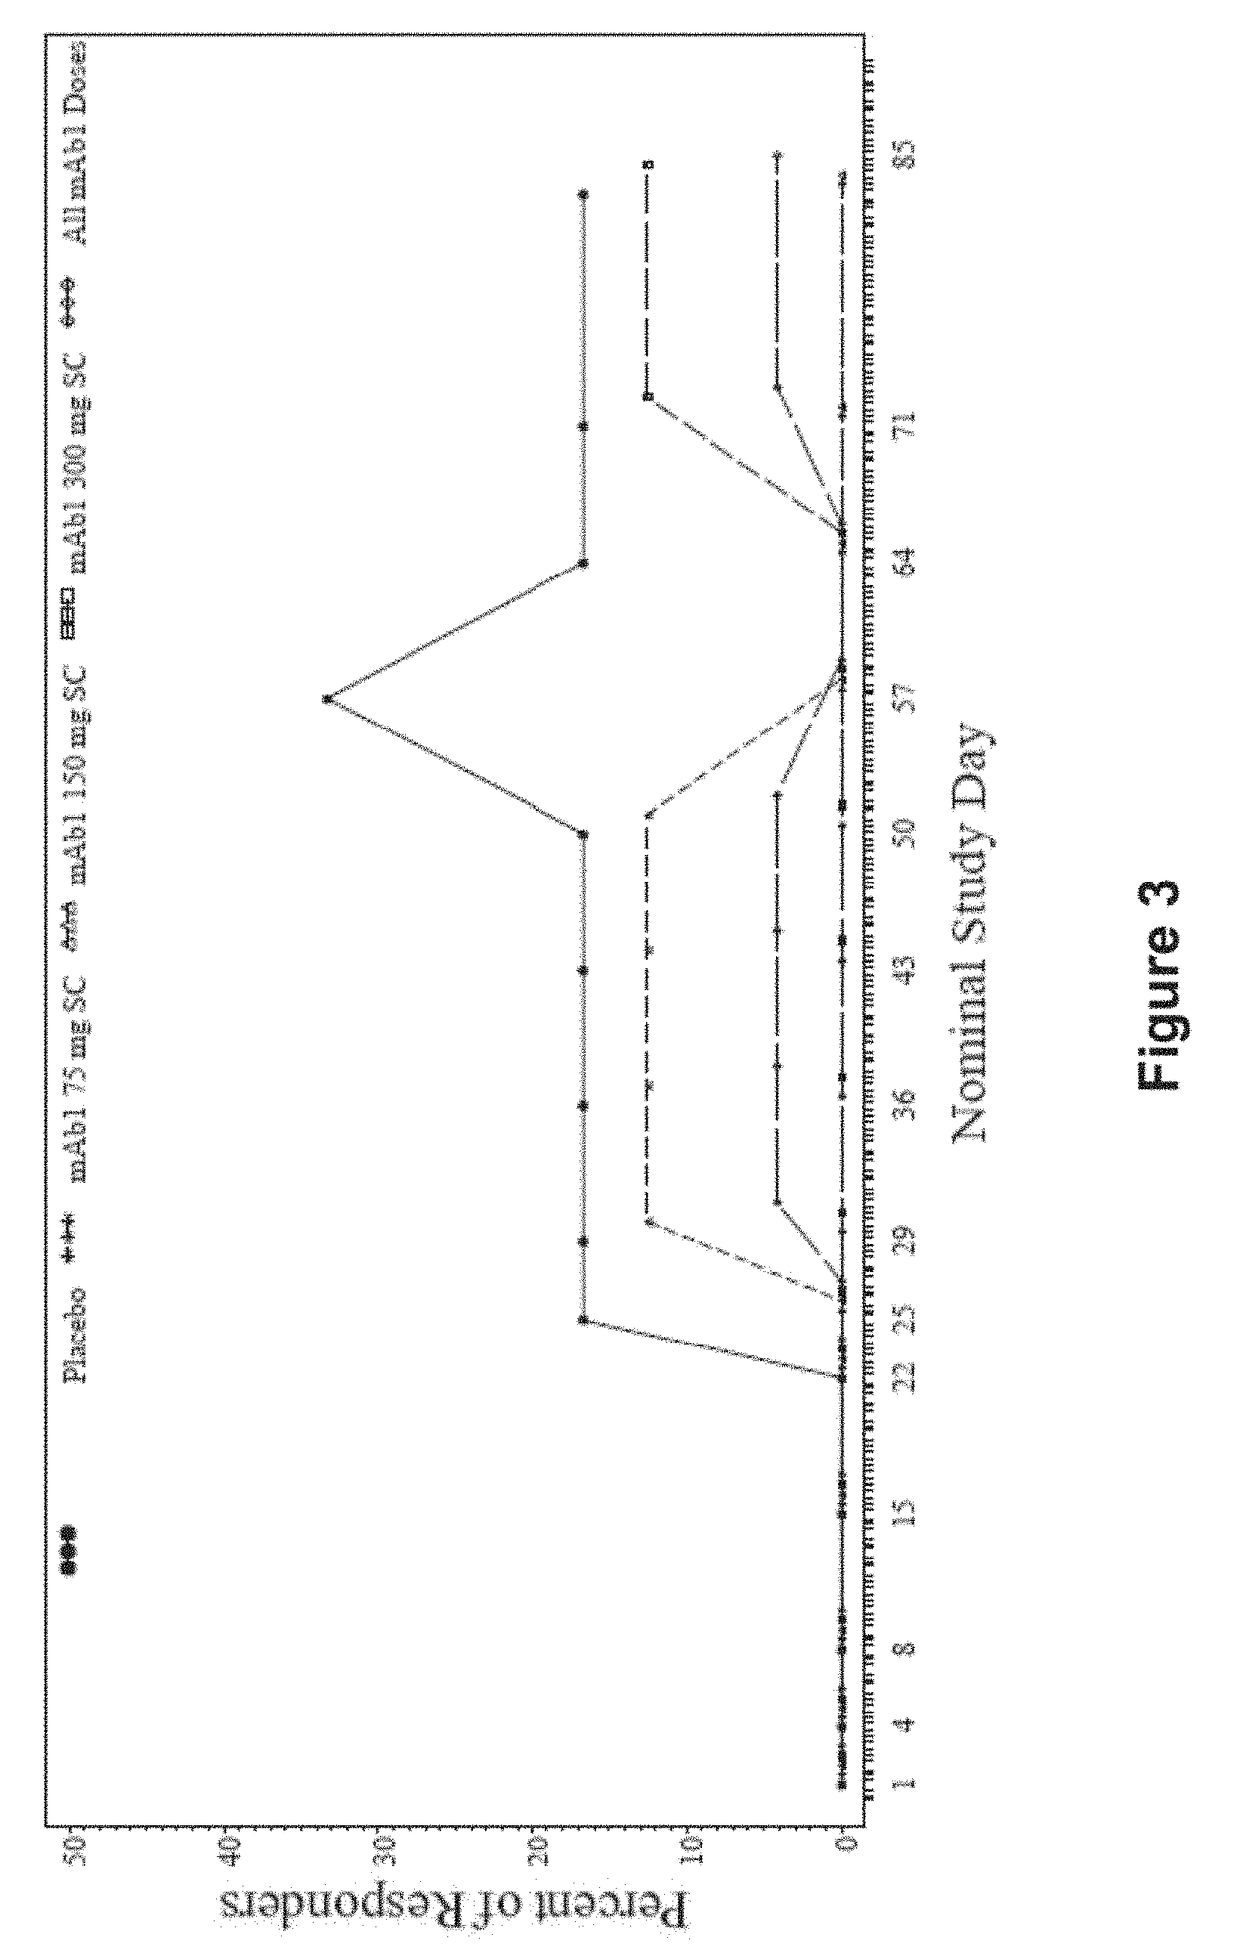 Methods for Treating Atopic Dermatitis by Administering an IL-4R Antagonist